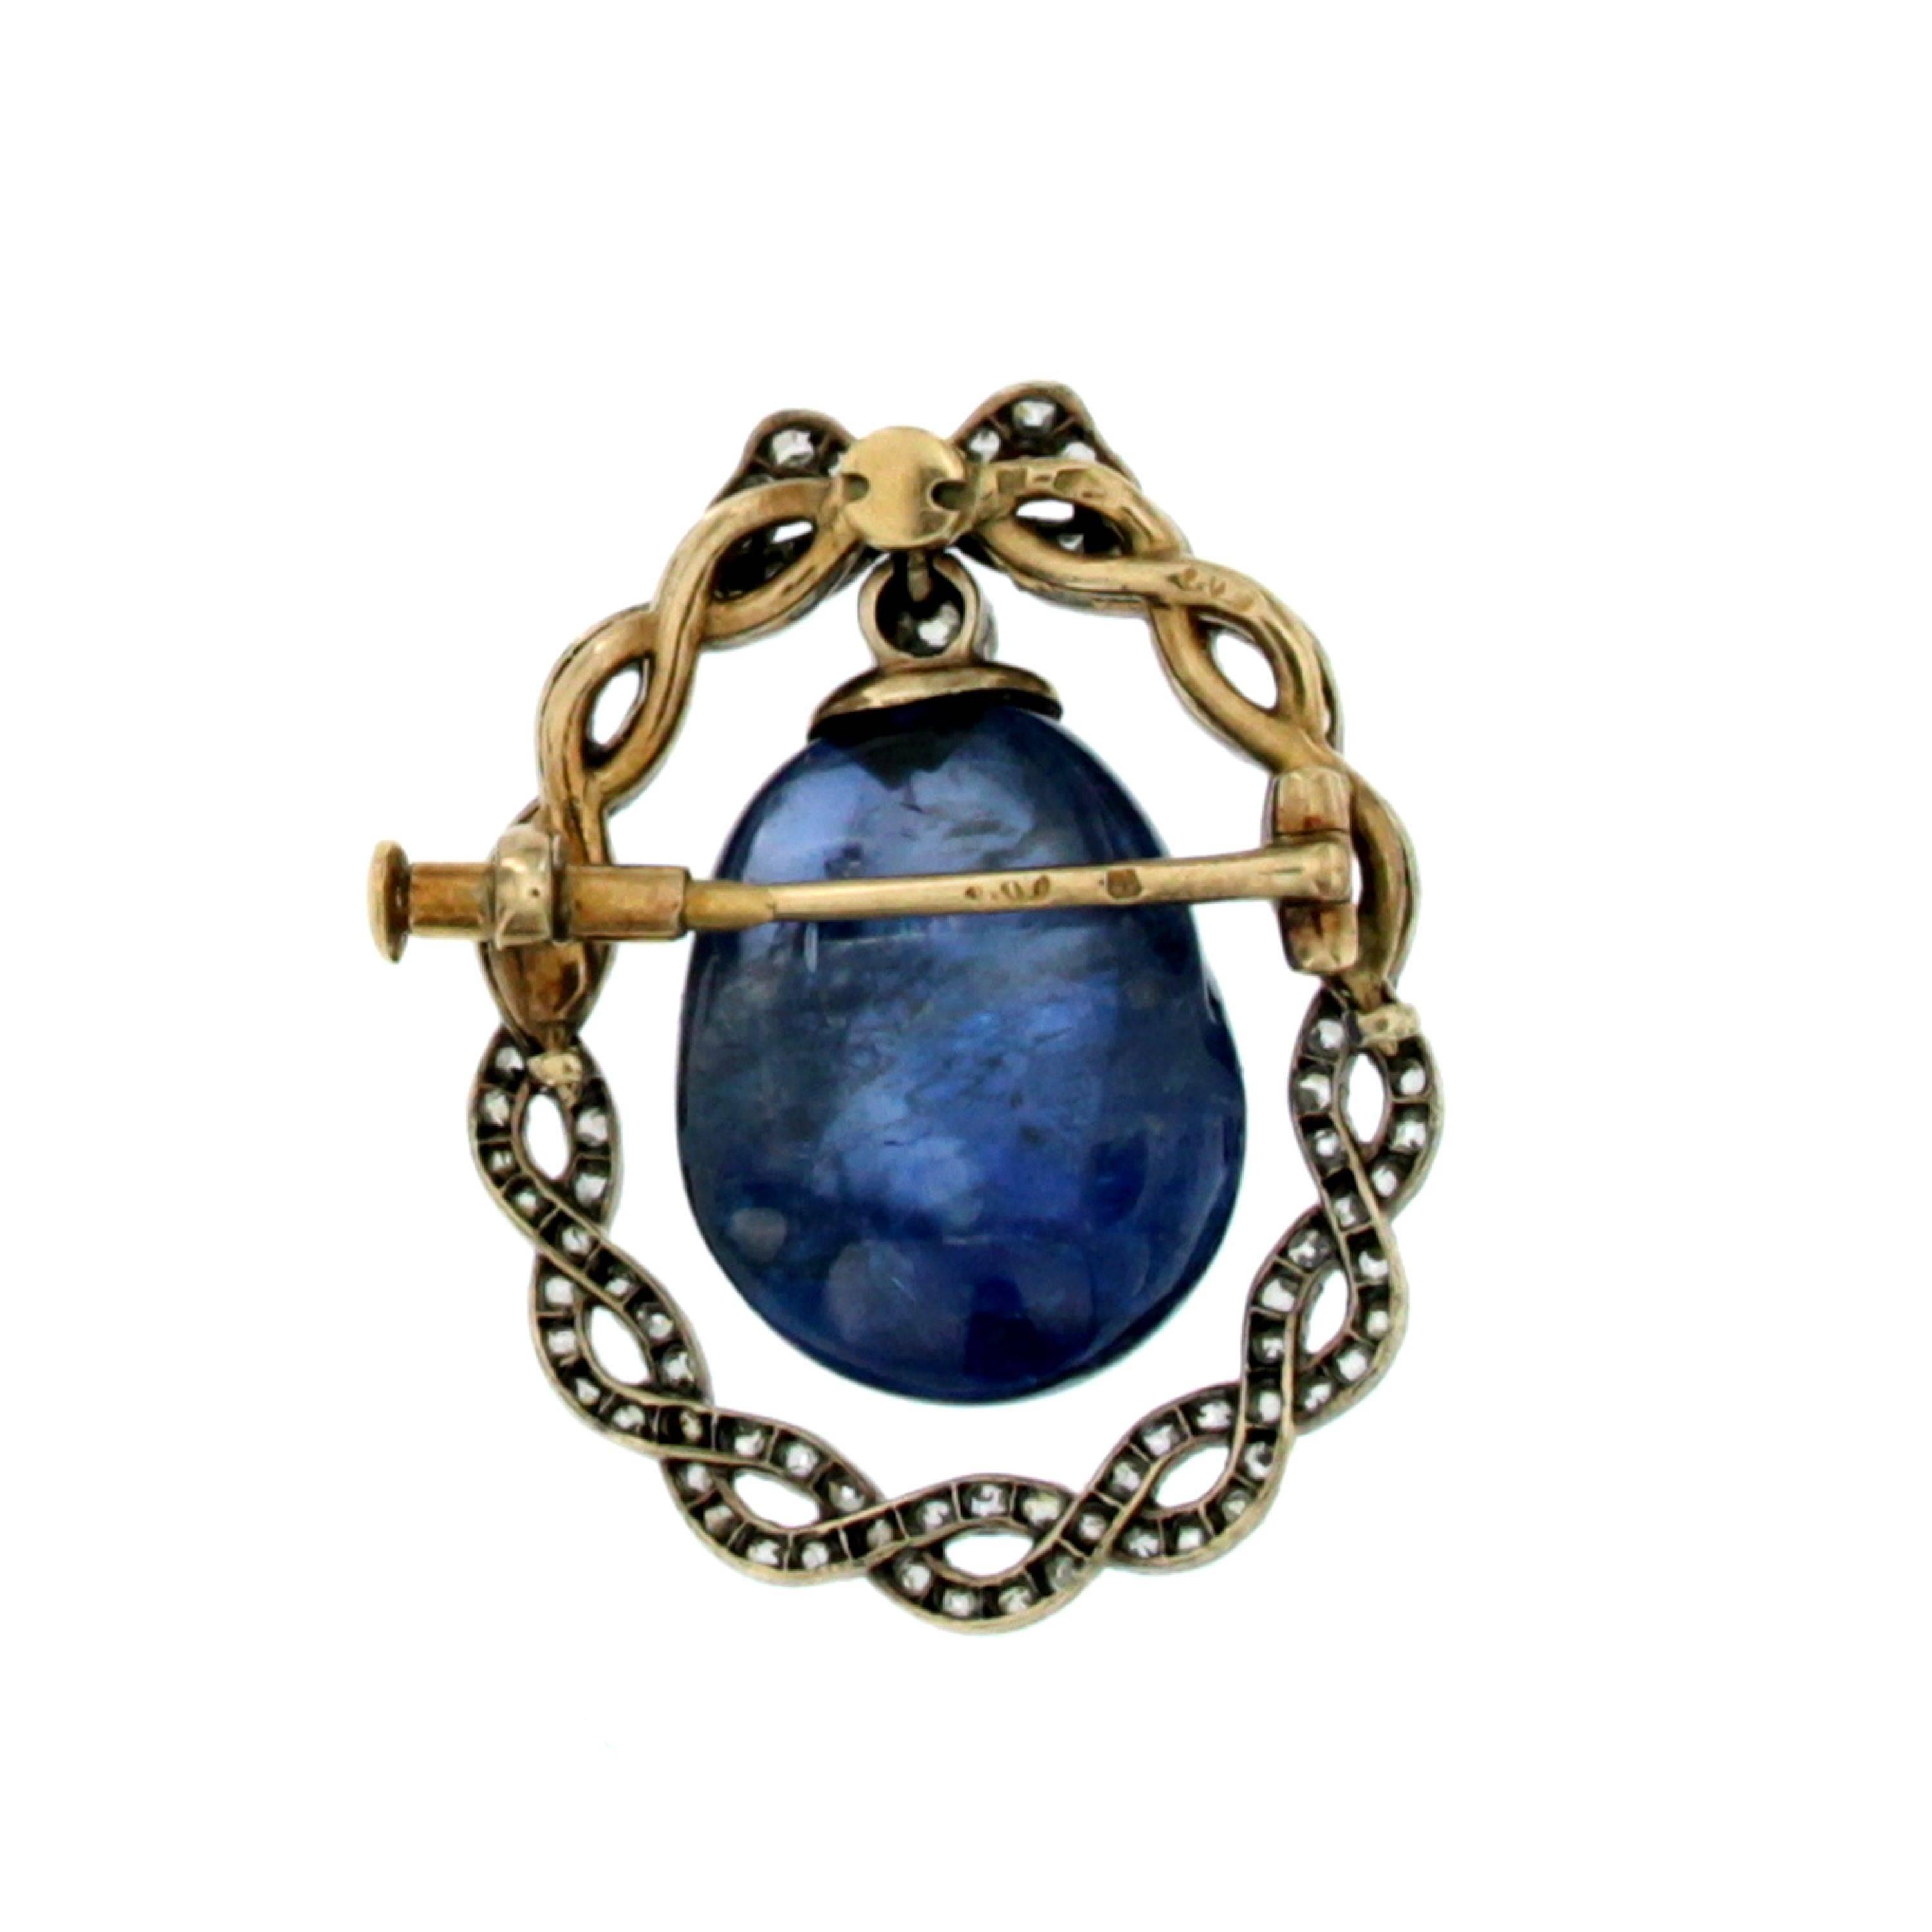 Unique piece, exquisite jewel to wear or to collect, in any case it is a must have!

Hand crafted in 18k gold and silver, it features a large Vivid blue natural Sapphire, the cut of the stone is an unusual custom cabochon polished of approx. 10